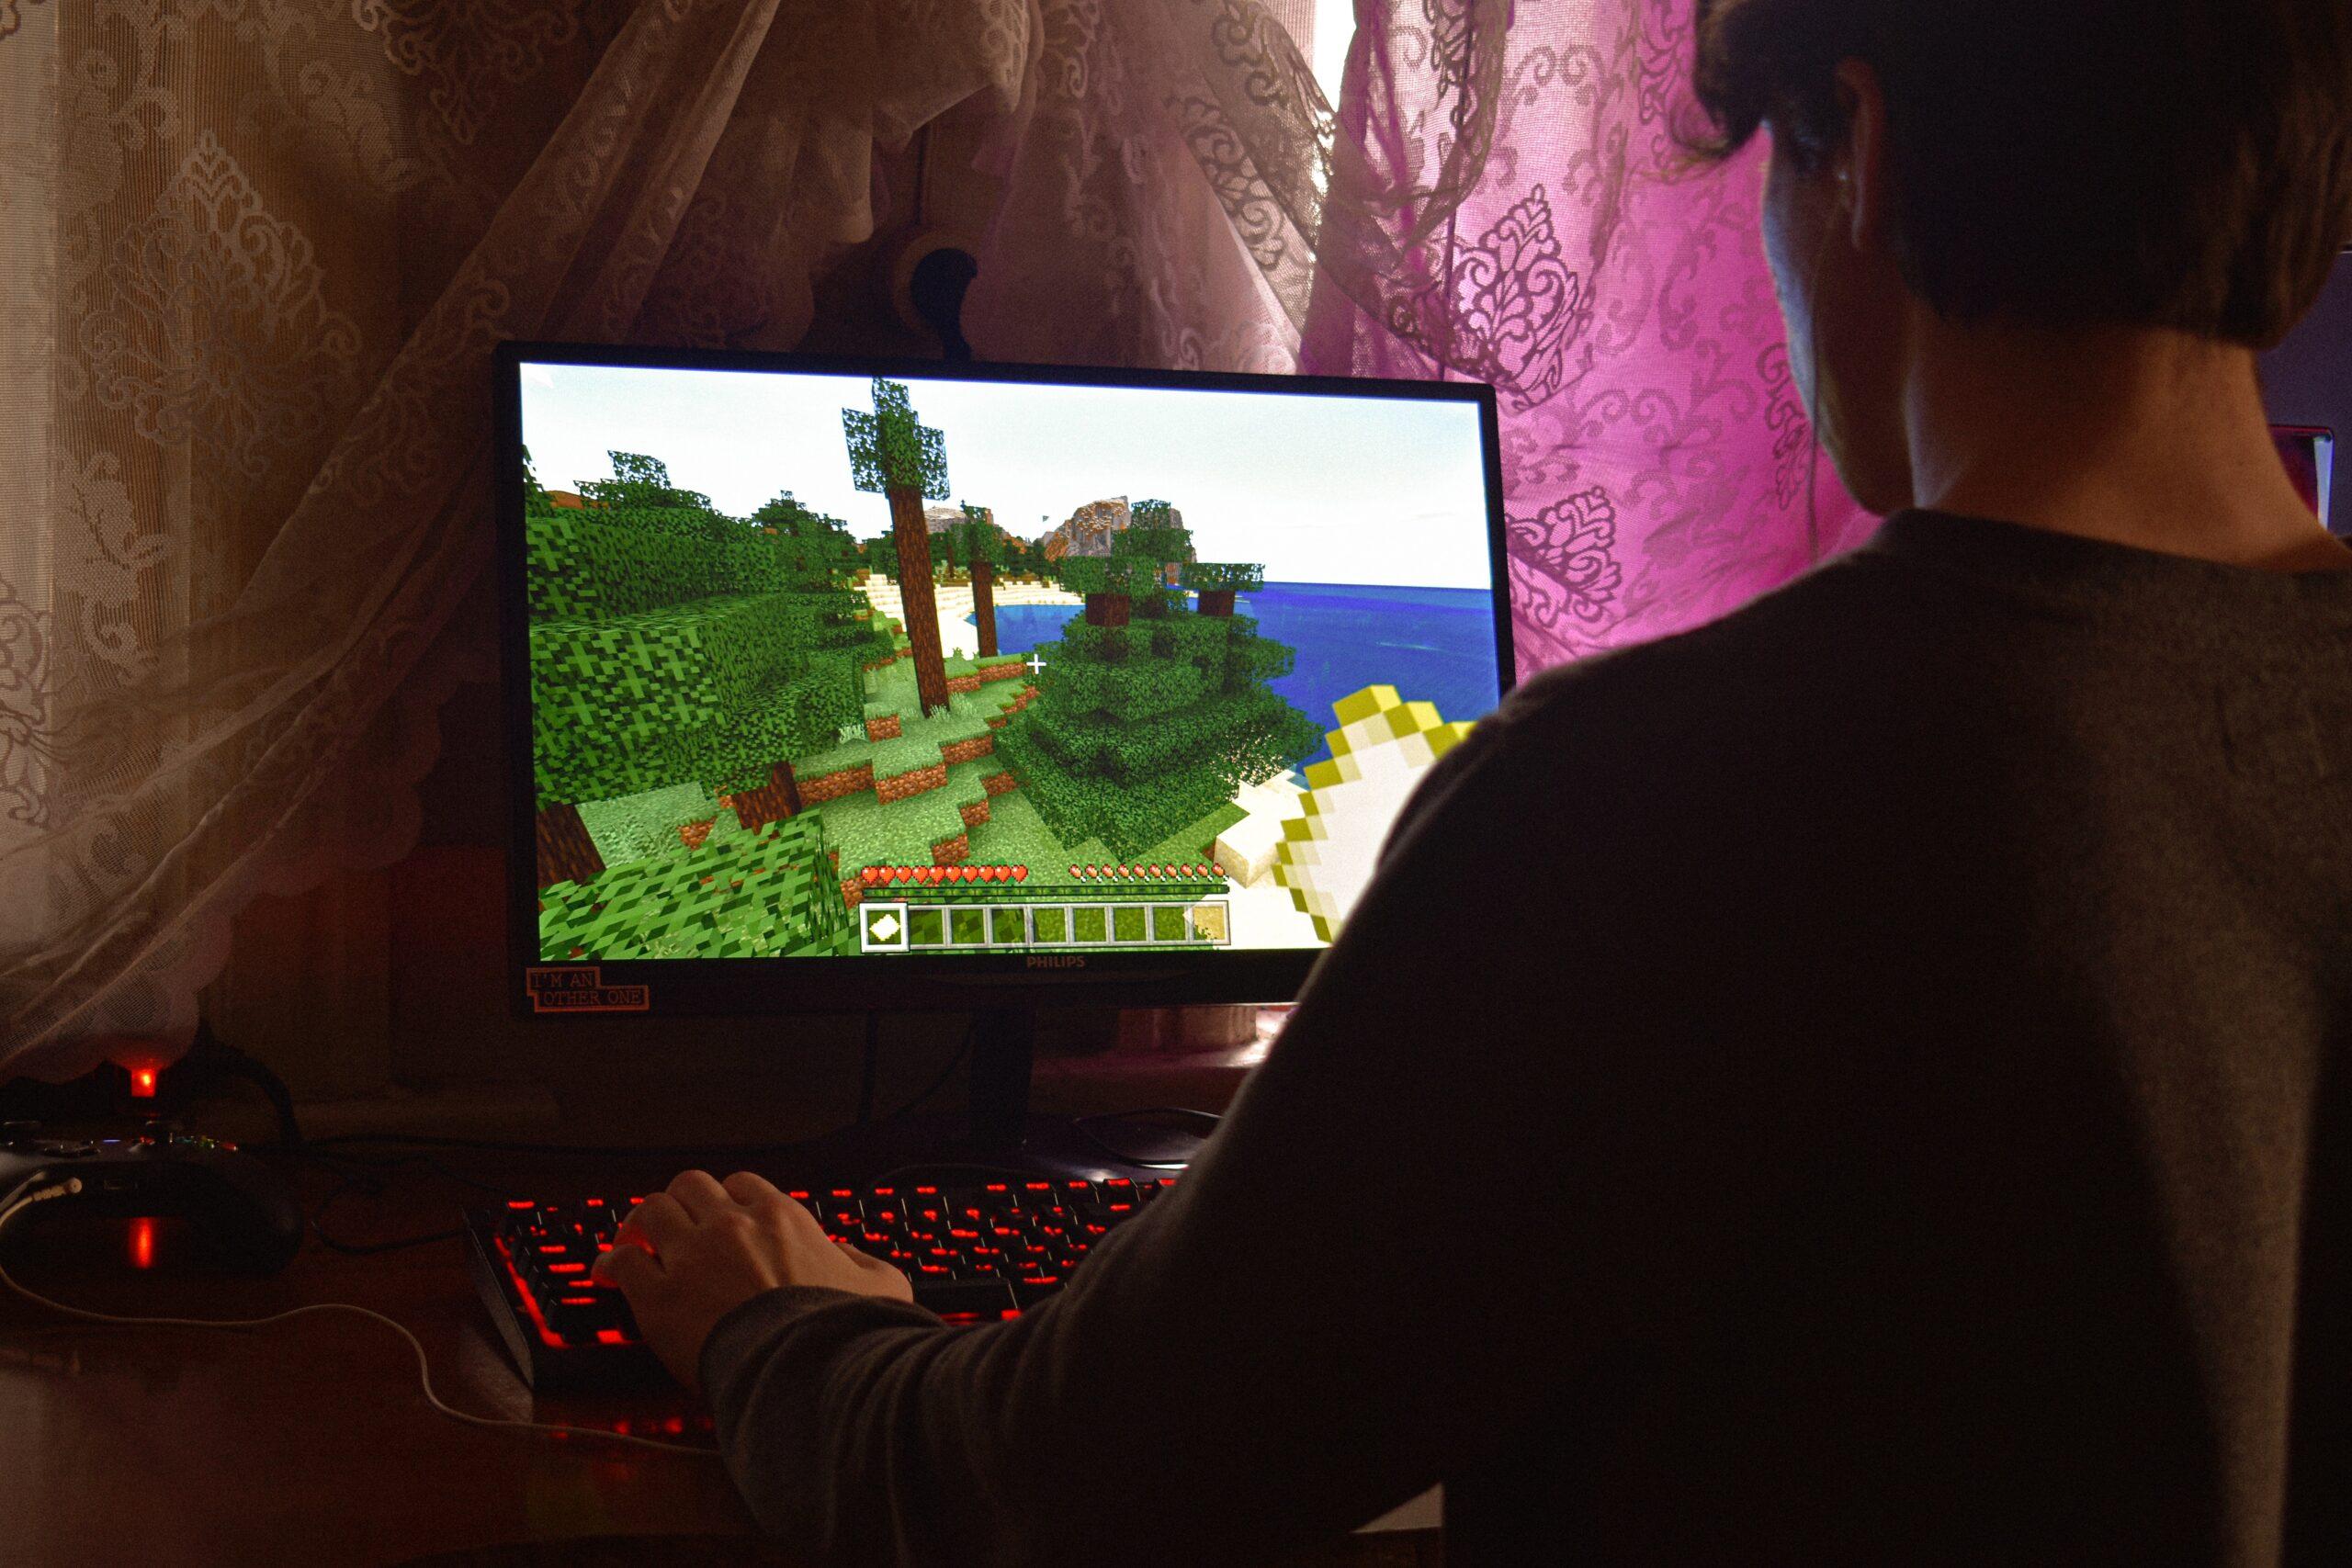 Analyzing the User Experience of Minecraft's Multiplayer